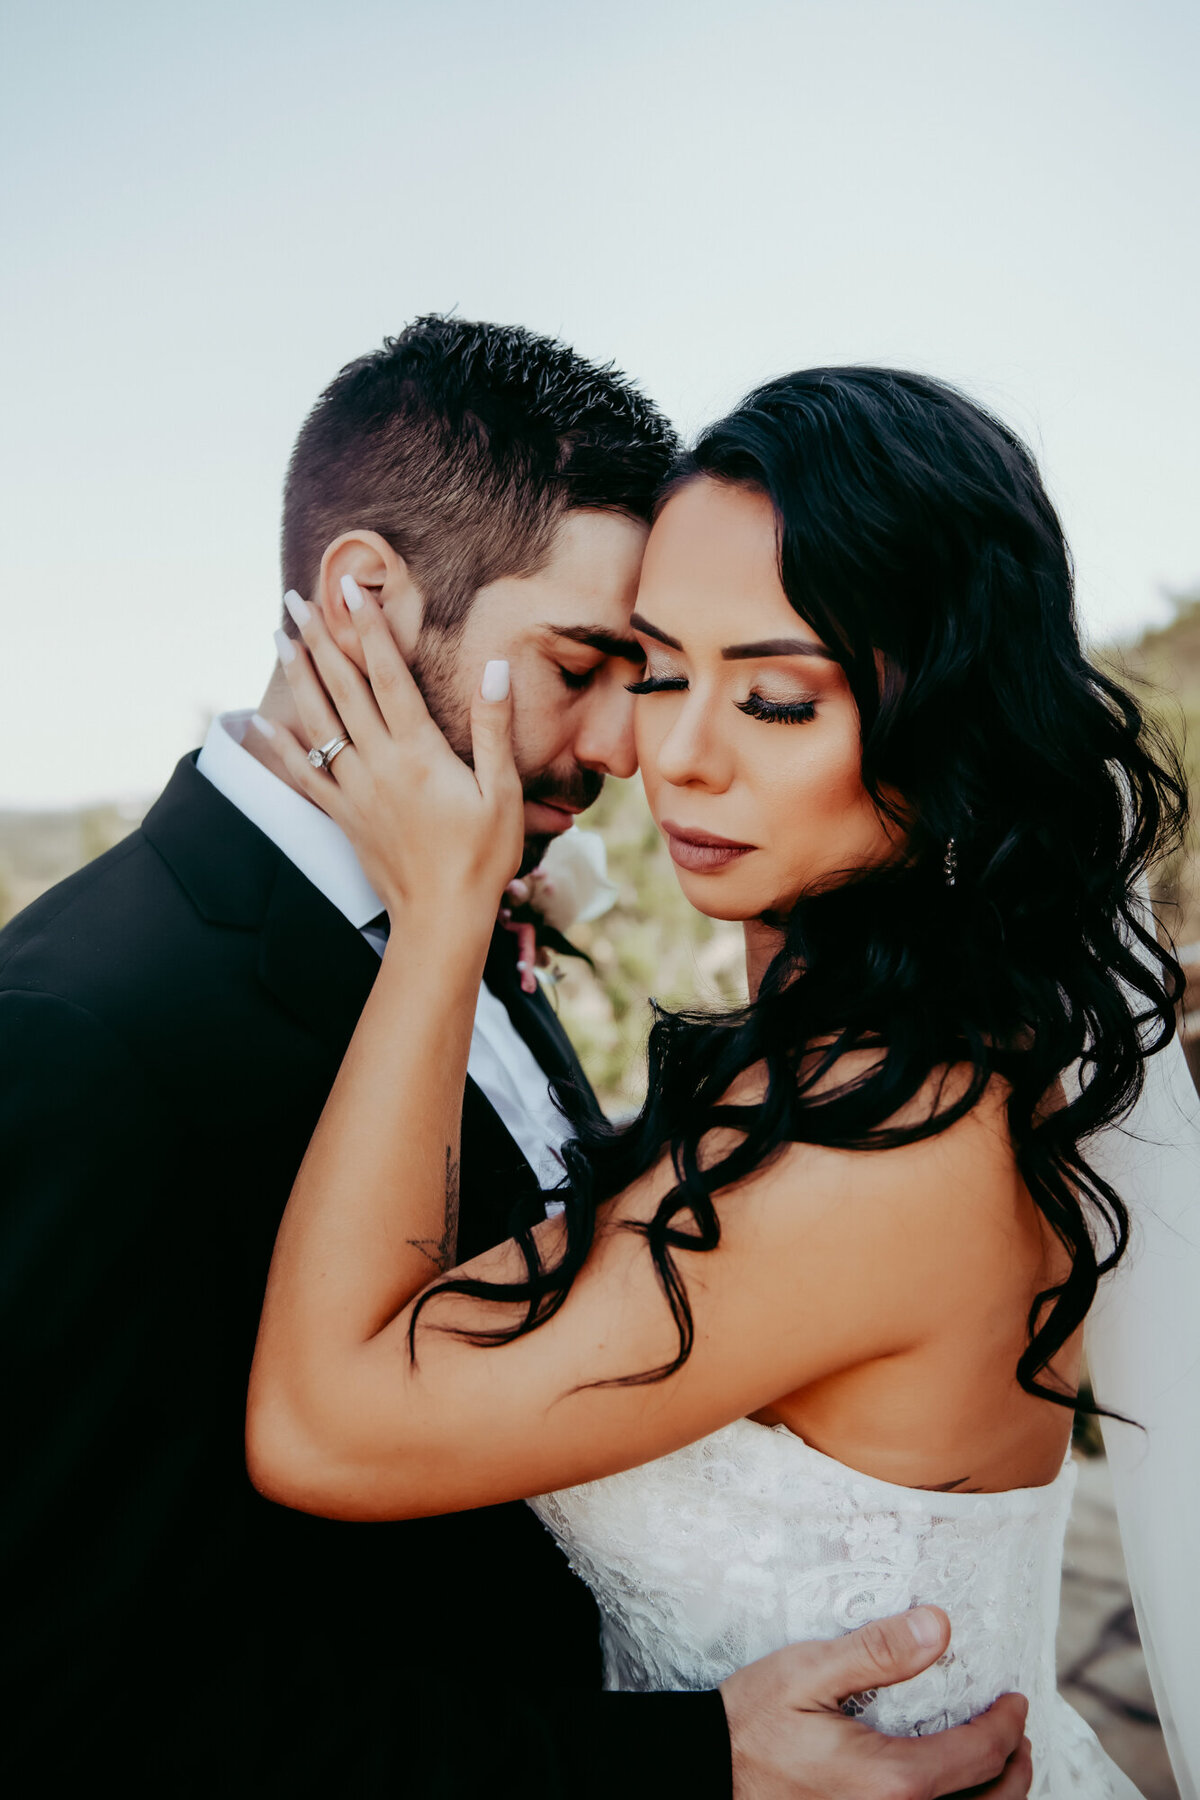 Couples Photography, a bride and groom hold each other tenderly, eyes closed as they embrace